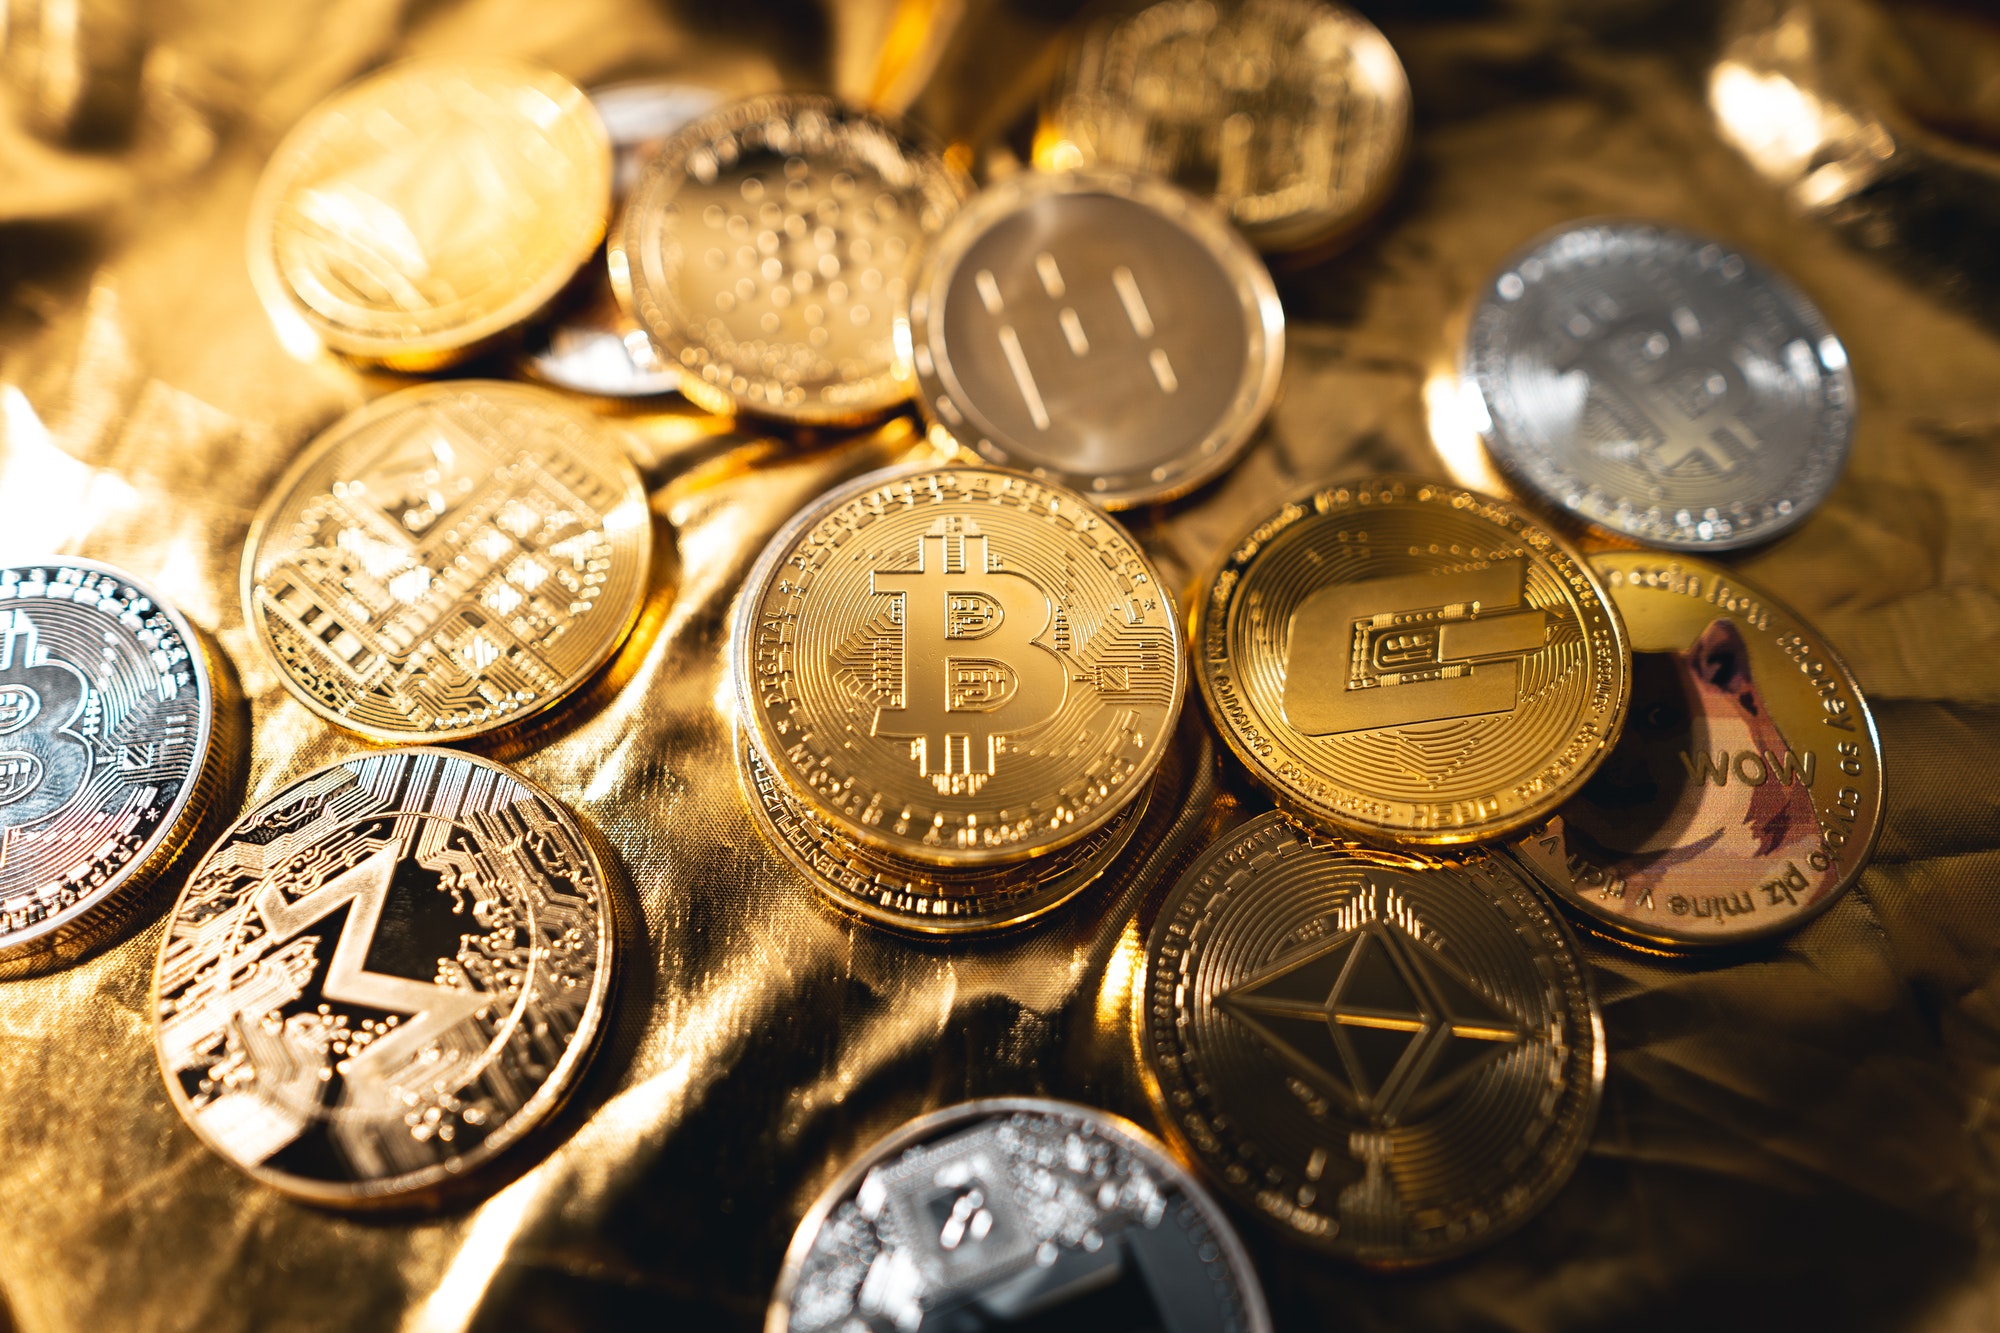 Cryptocurrency golden bitcoin image for crypto currency